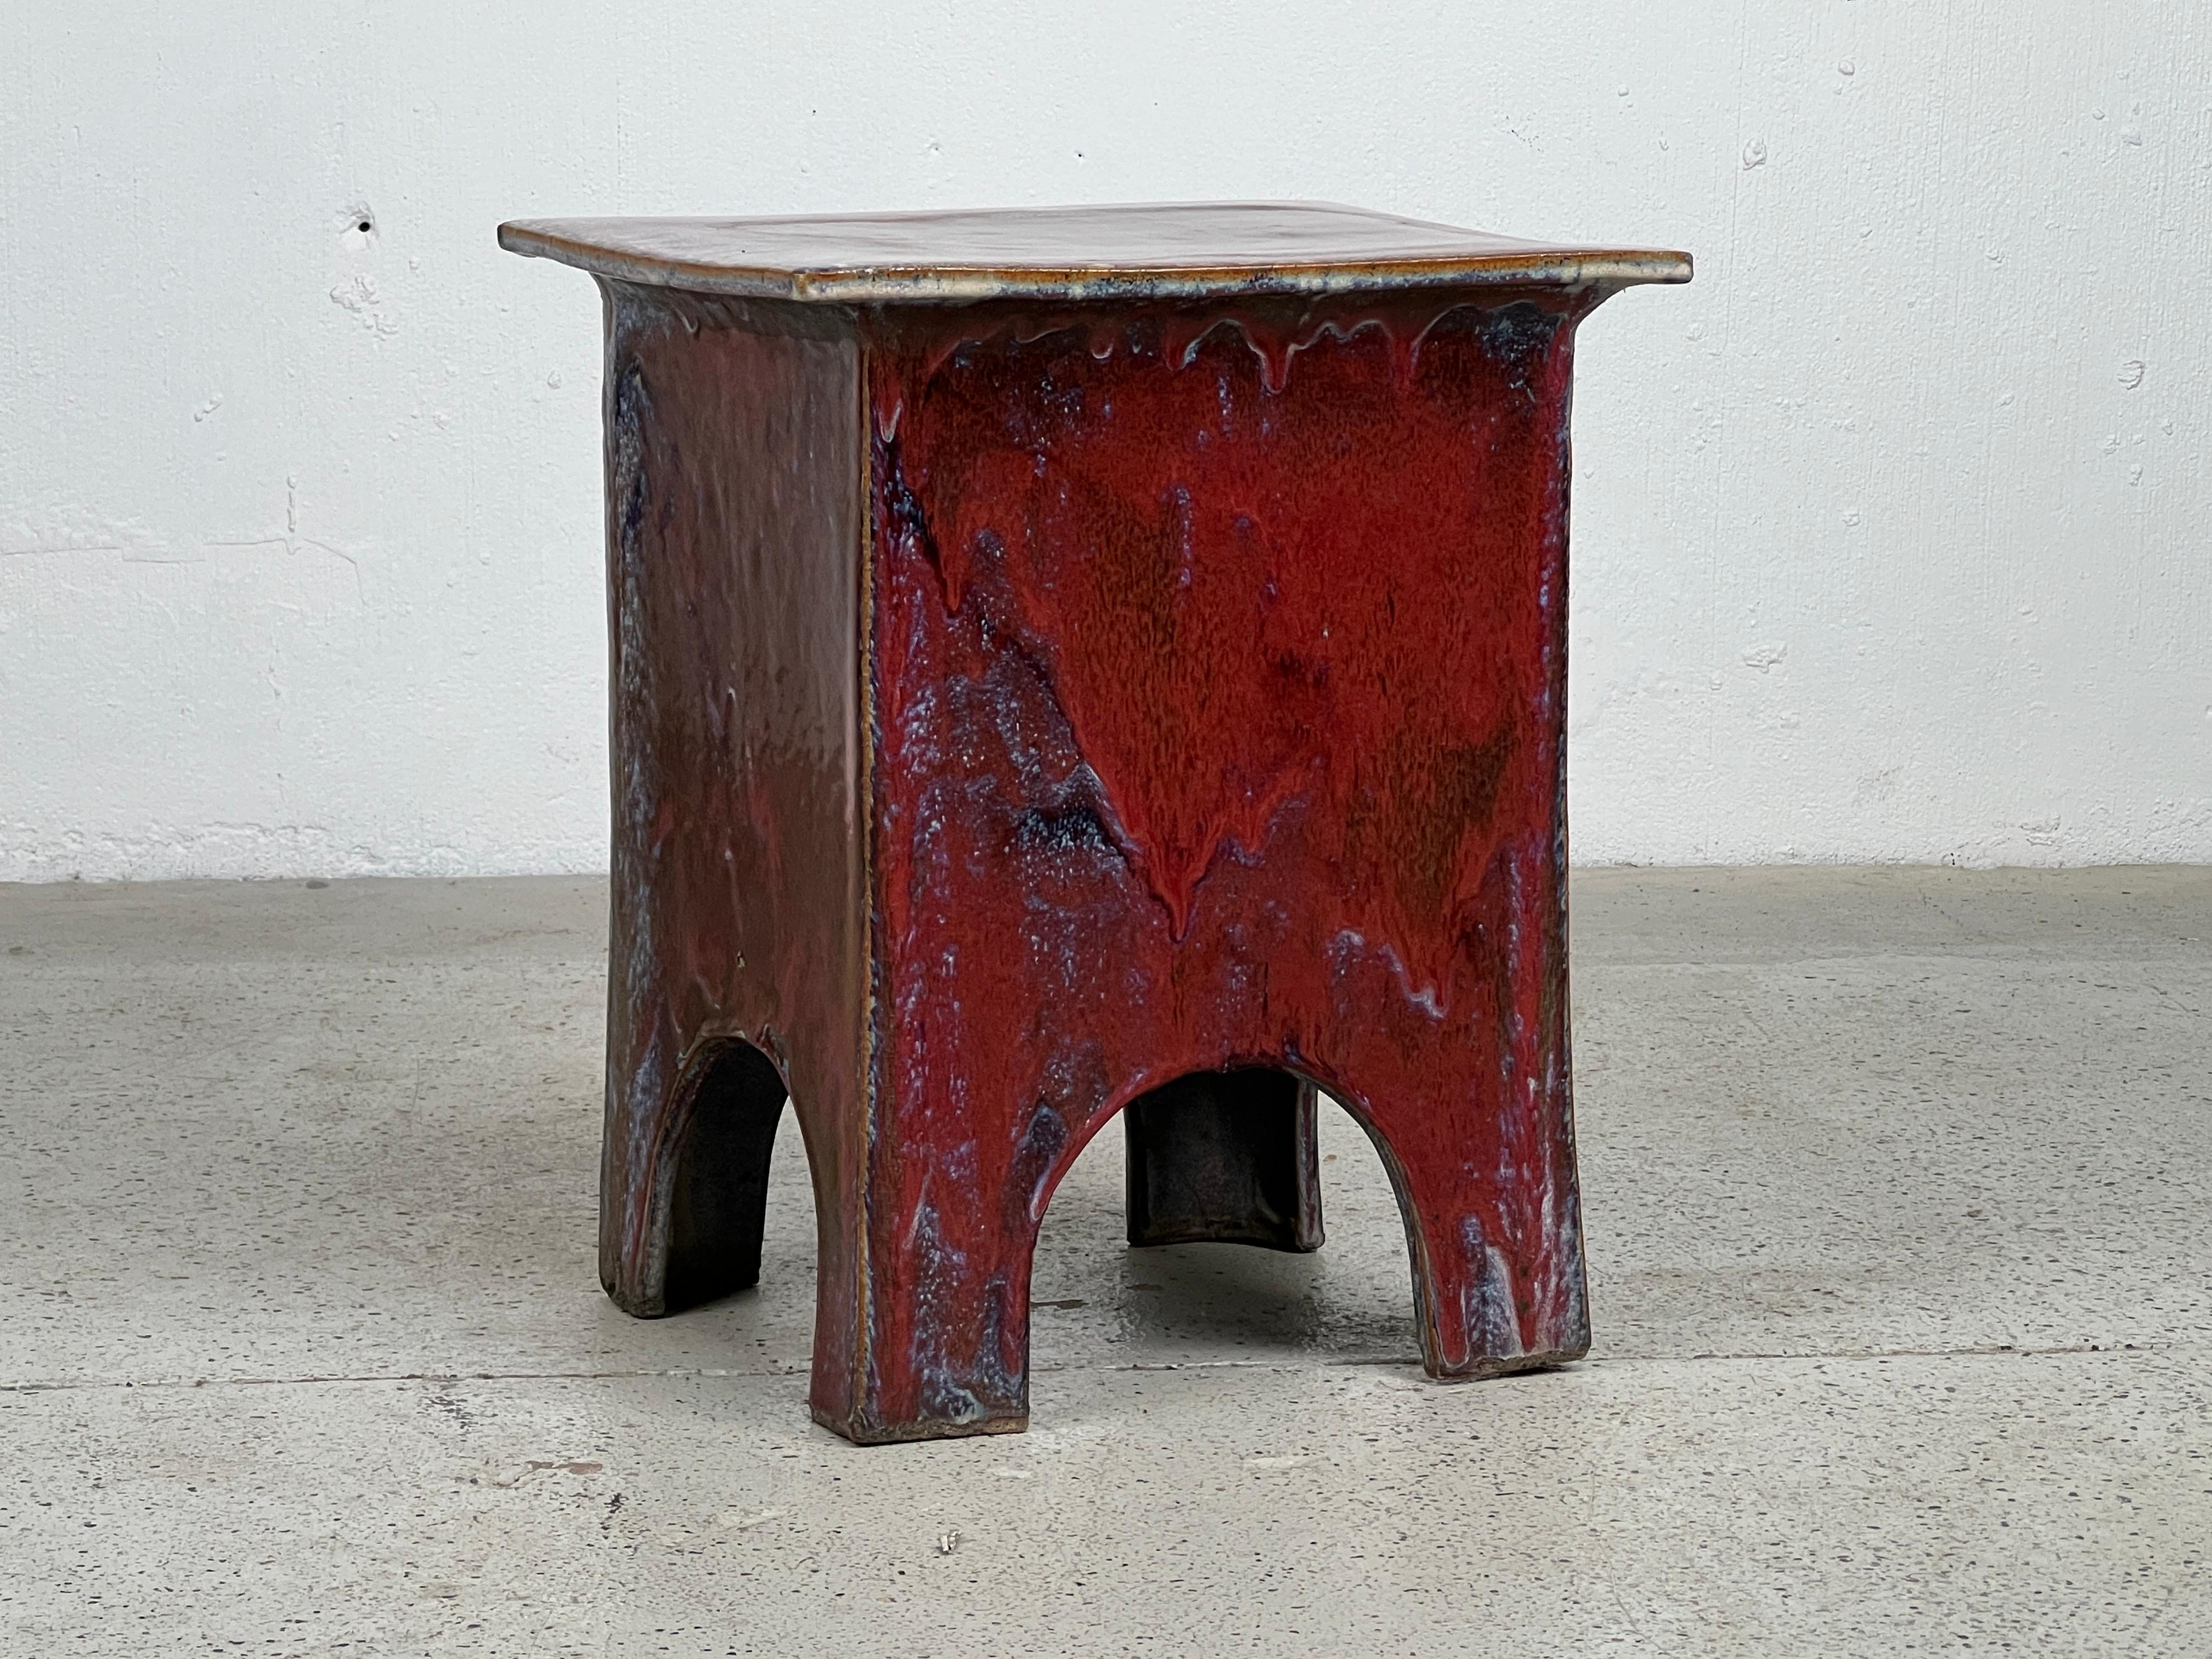 Eric O'Leary Slab rolled and hand constructed with Asiatic aesthetic and form finished in a vibrant glaze. A similar bench can be found in the permanent collection of the Museum of Fine Arts, Boston.